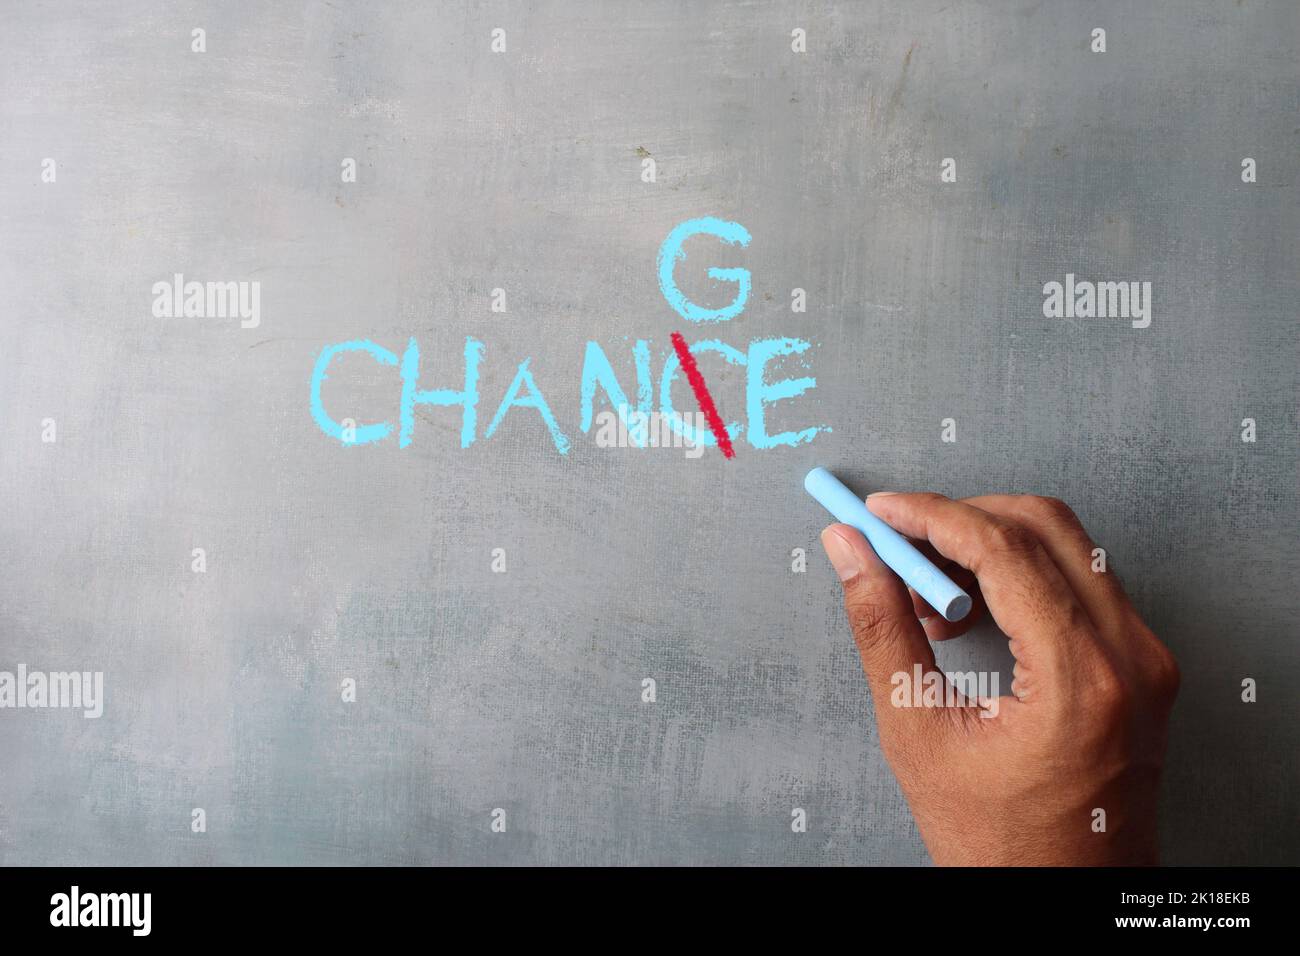 Top view image of hand writing the word Chance into Change in a conceptual image. Motivation concept. Stock Photo